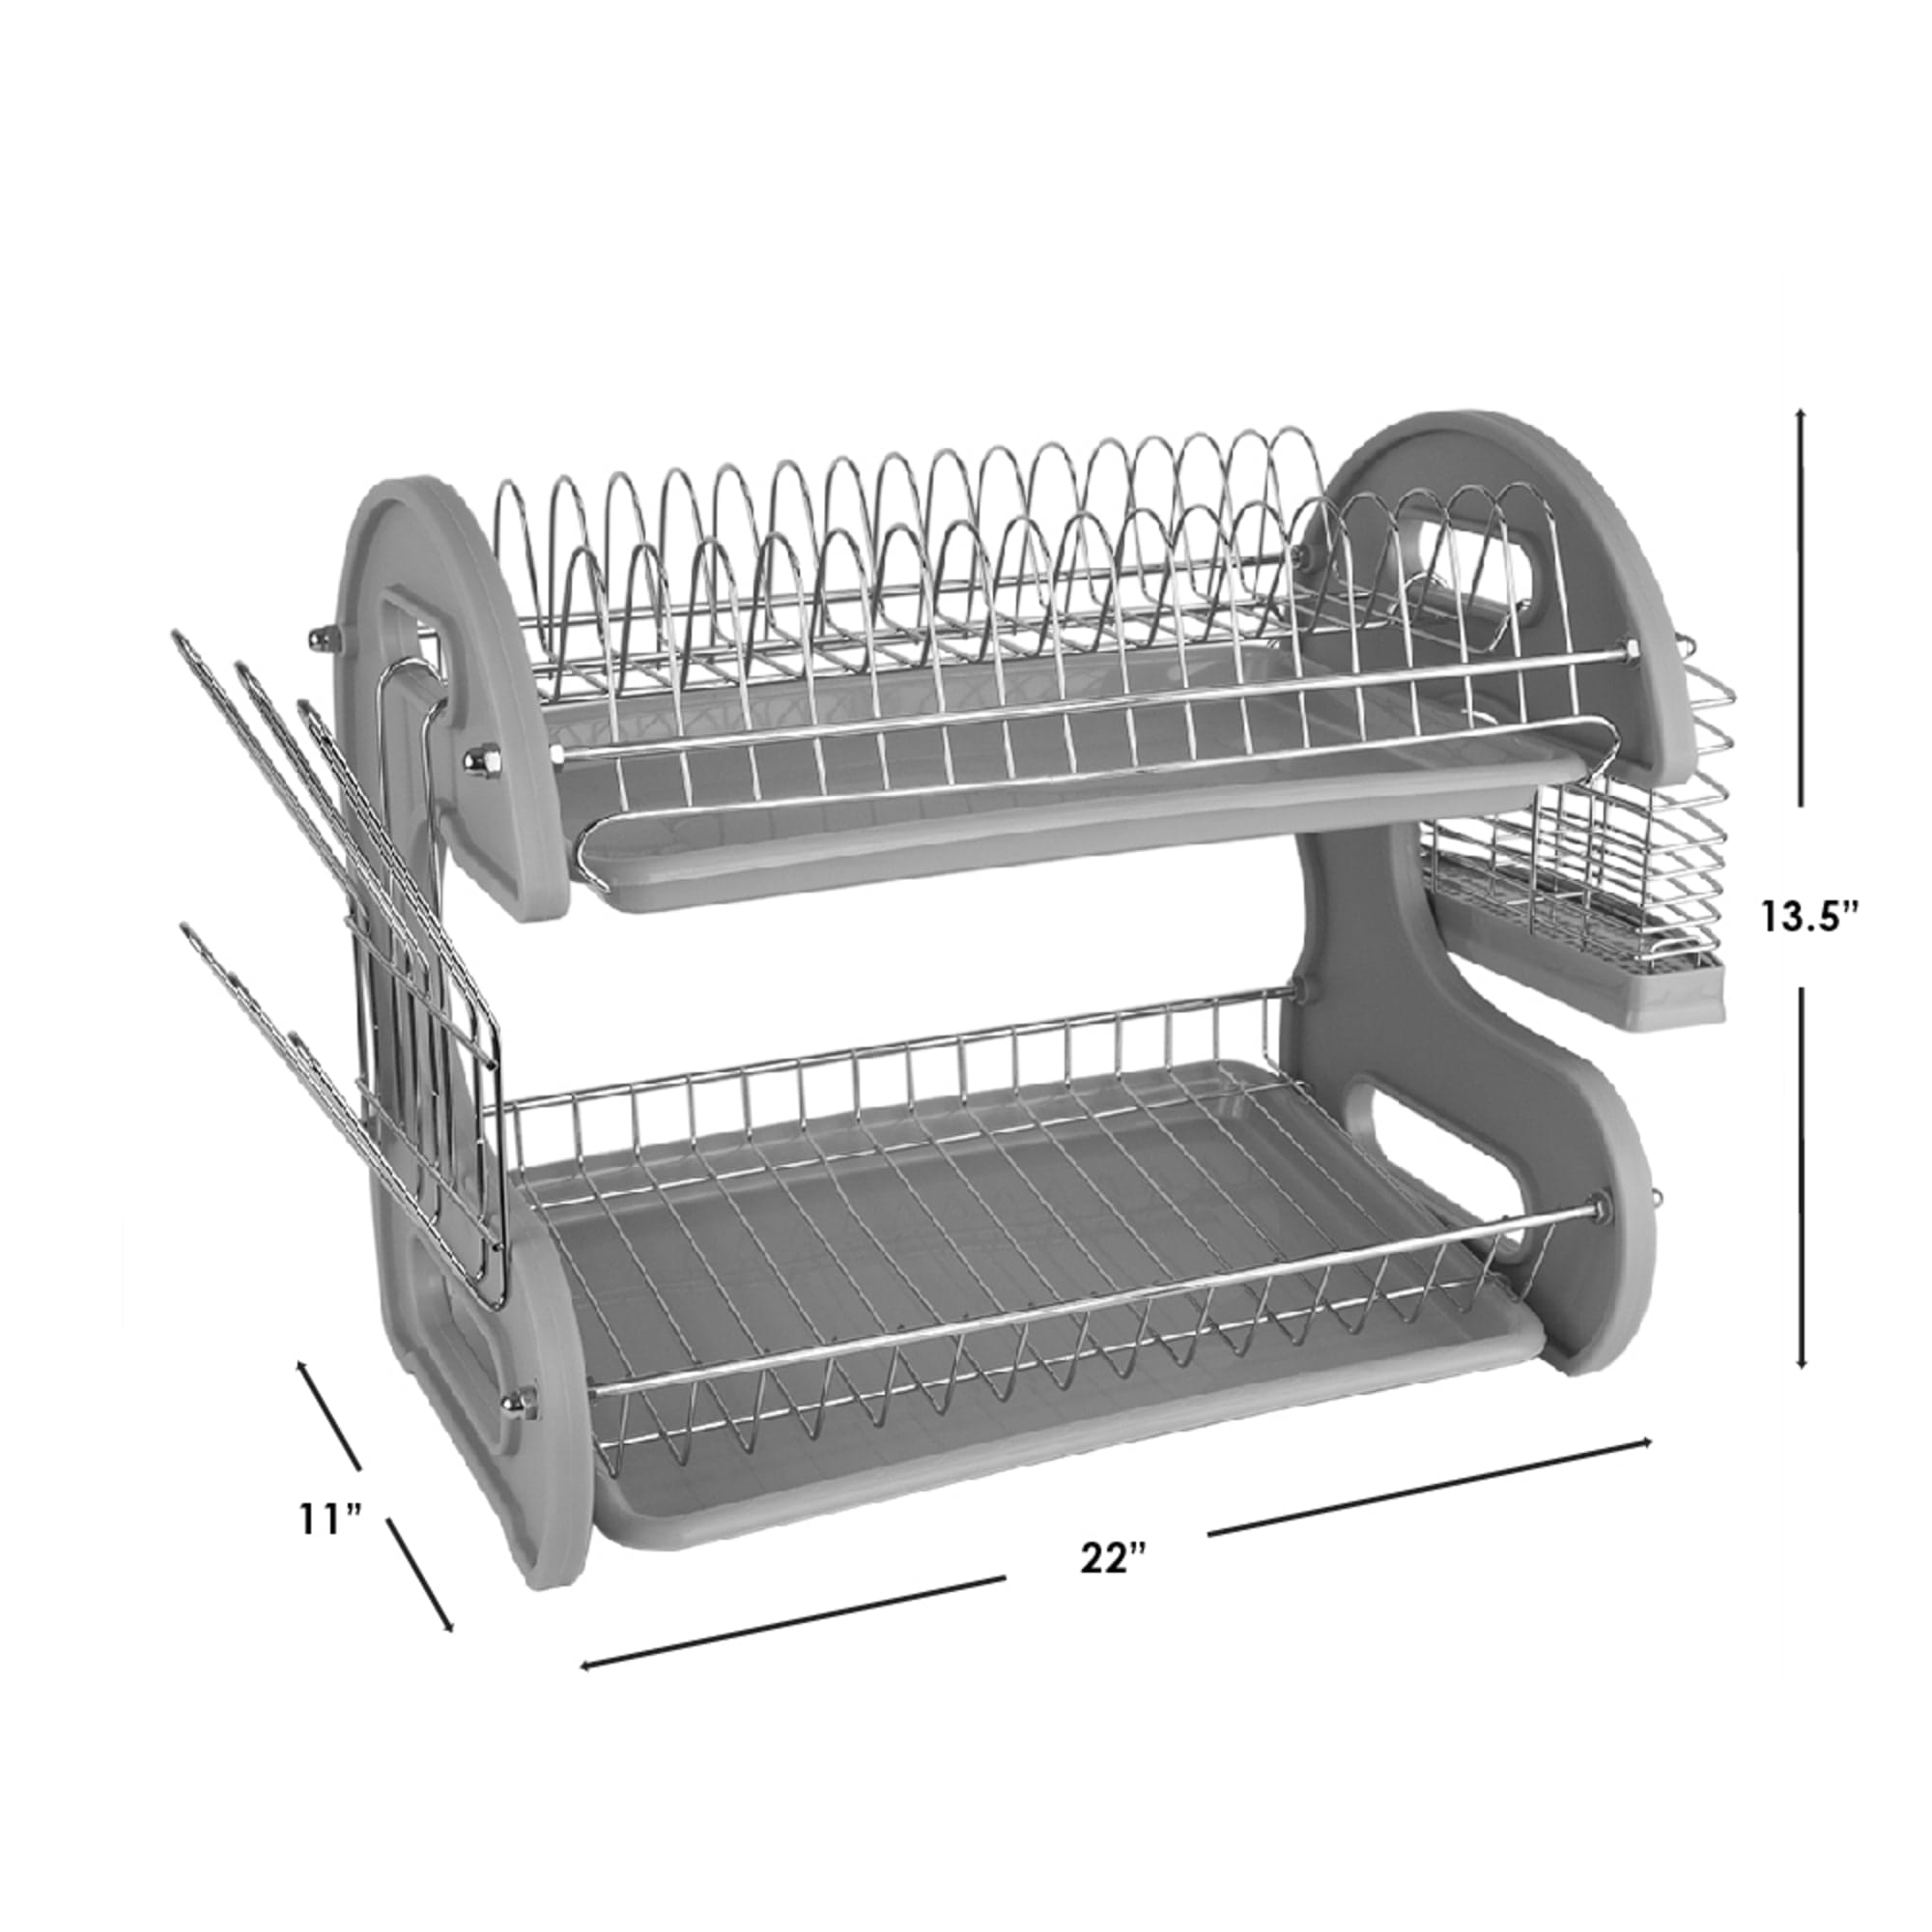 Home Basics 2 Tier Dish Drainer, Grey $20.00 EACH, CASE PACK OF 6